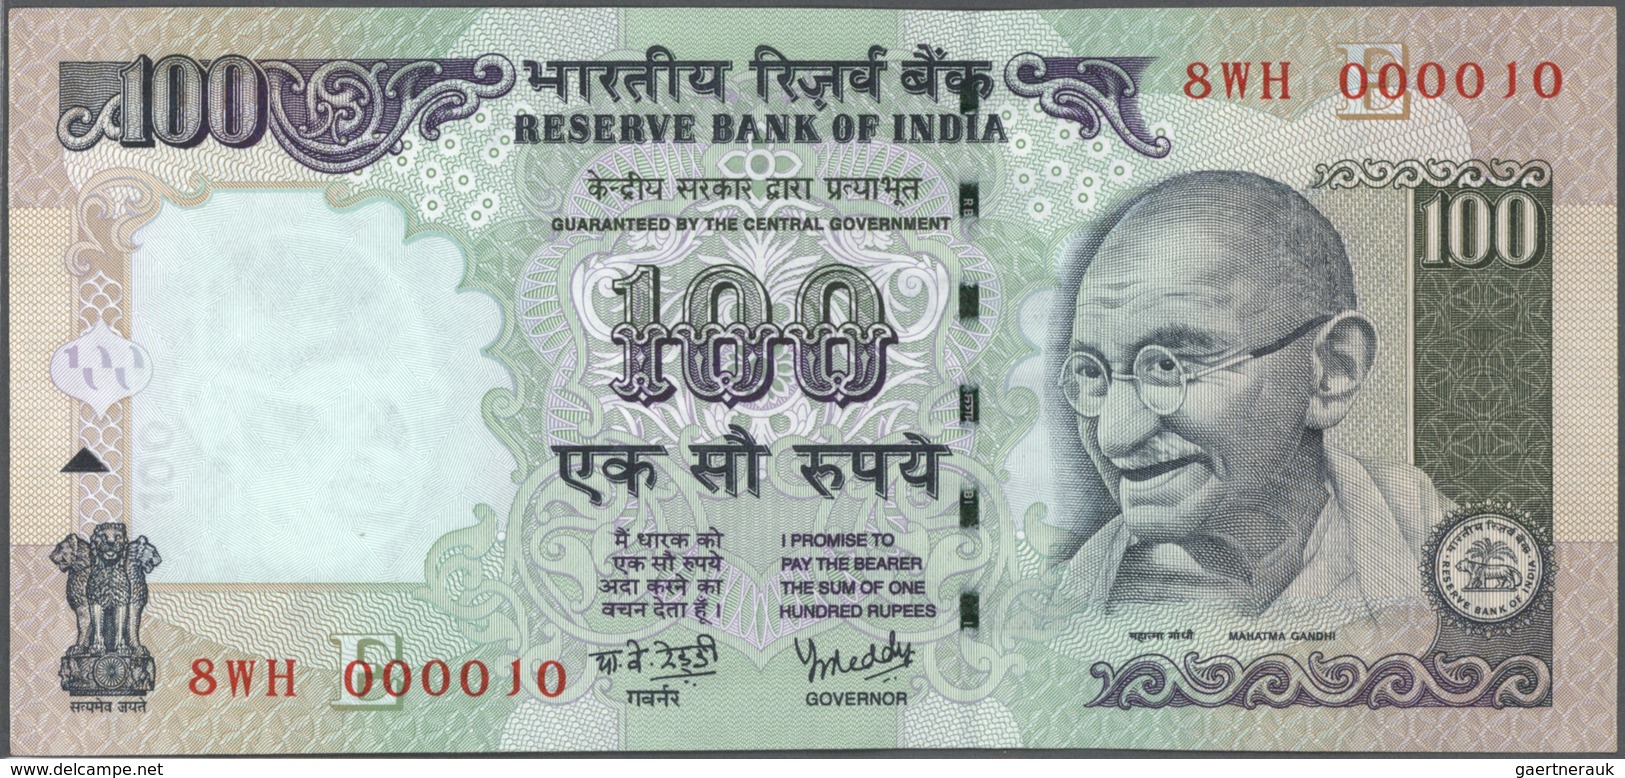 India / Indien: et of 10 notes 100 Rupees 2009 P. 98 all with interesting serial number containing a